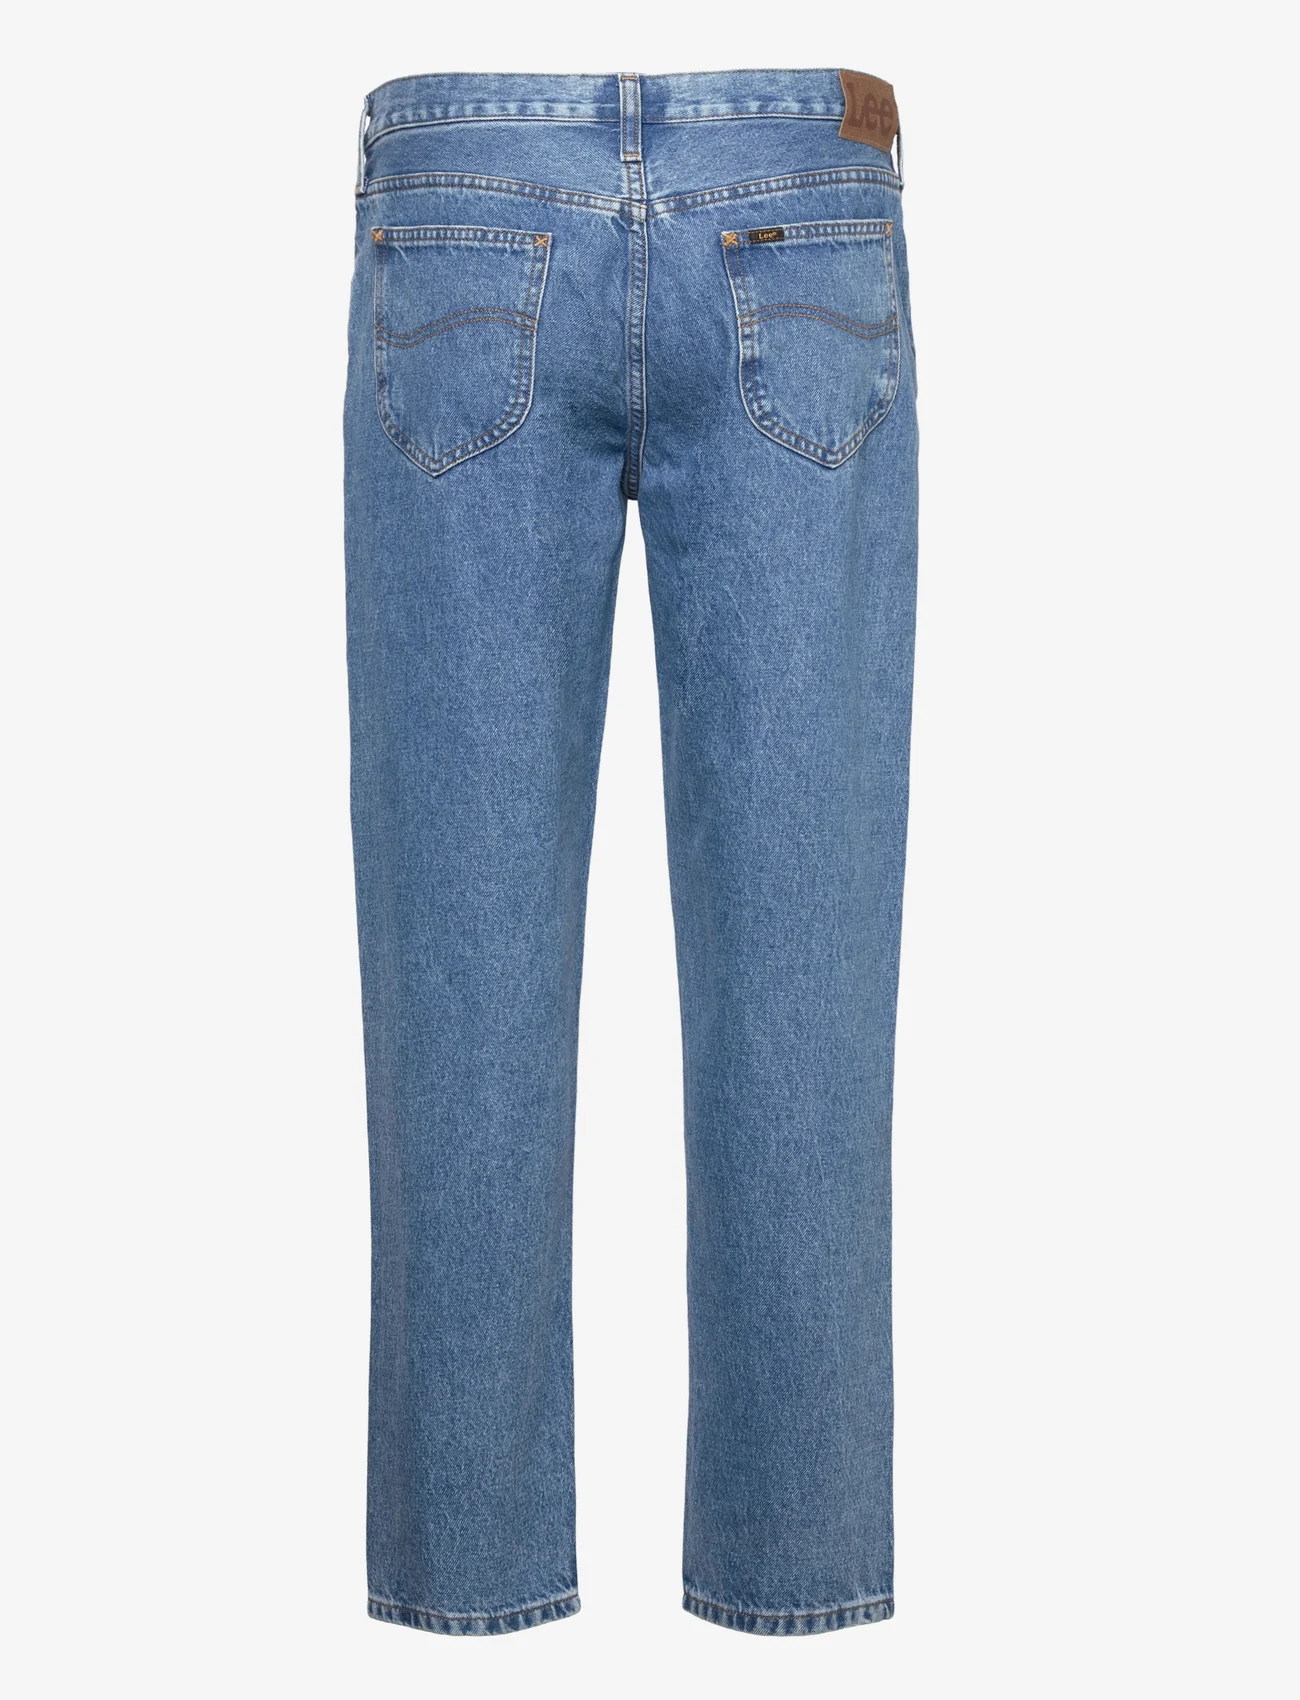 Lee Jeans - OSCAR - relaxed jeans - stone free - 1